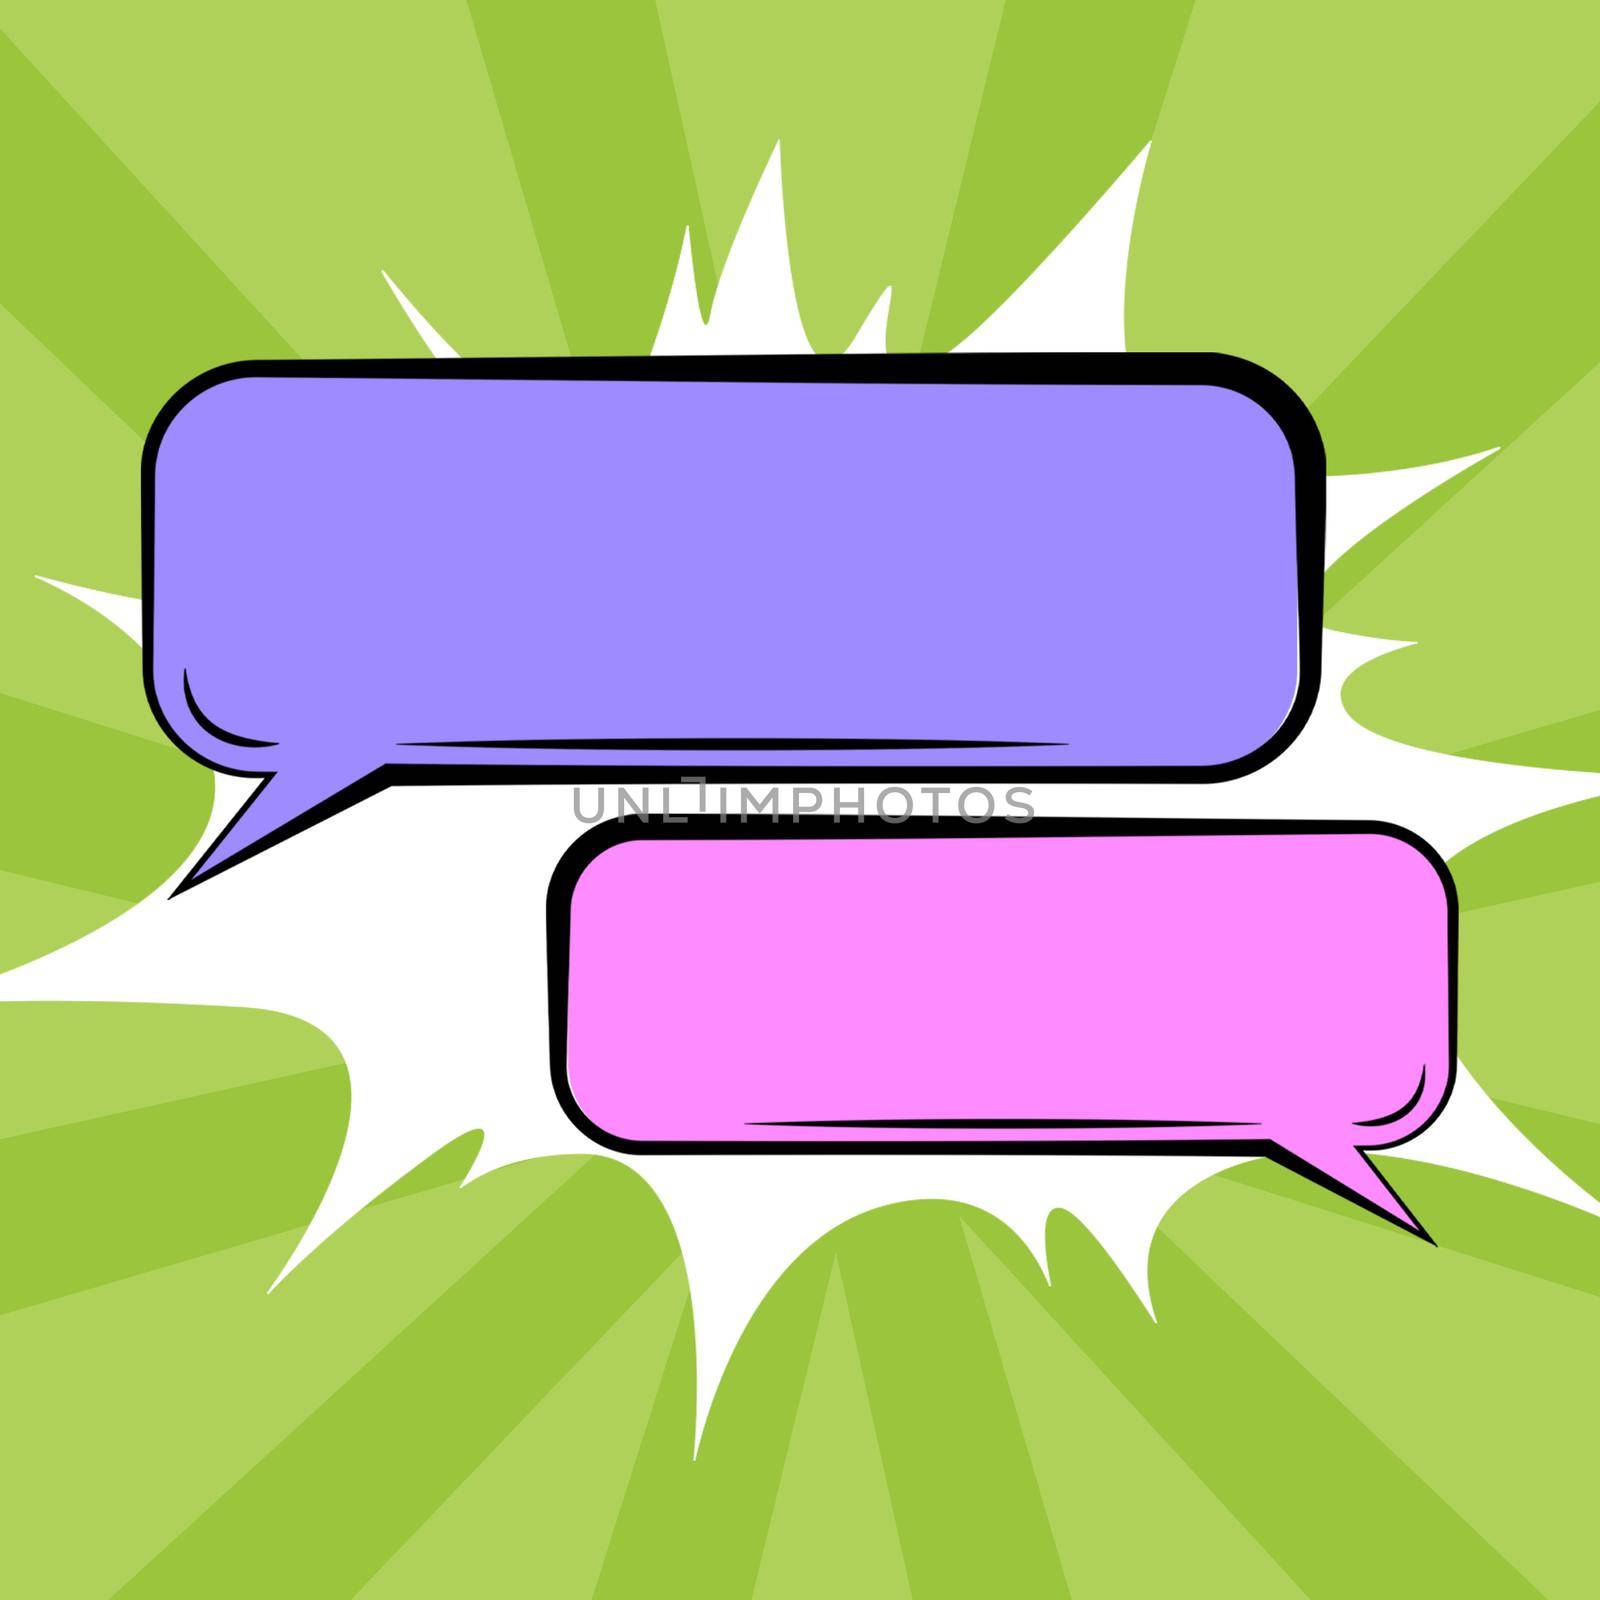 Pair Of Blank Color Speech Bubbles Of Rectangular Shape With Copy Space Over Color Background. Empty Chat Boxes S Representing Social Media Communication And Connection. by nialowwa